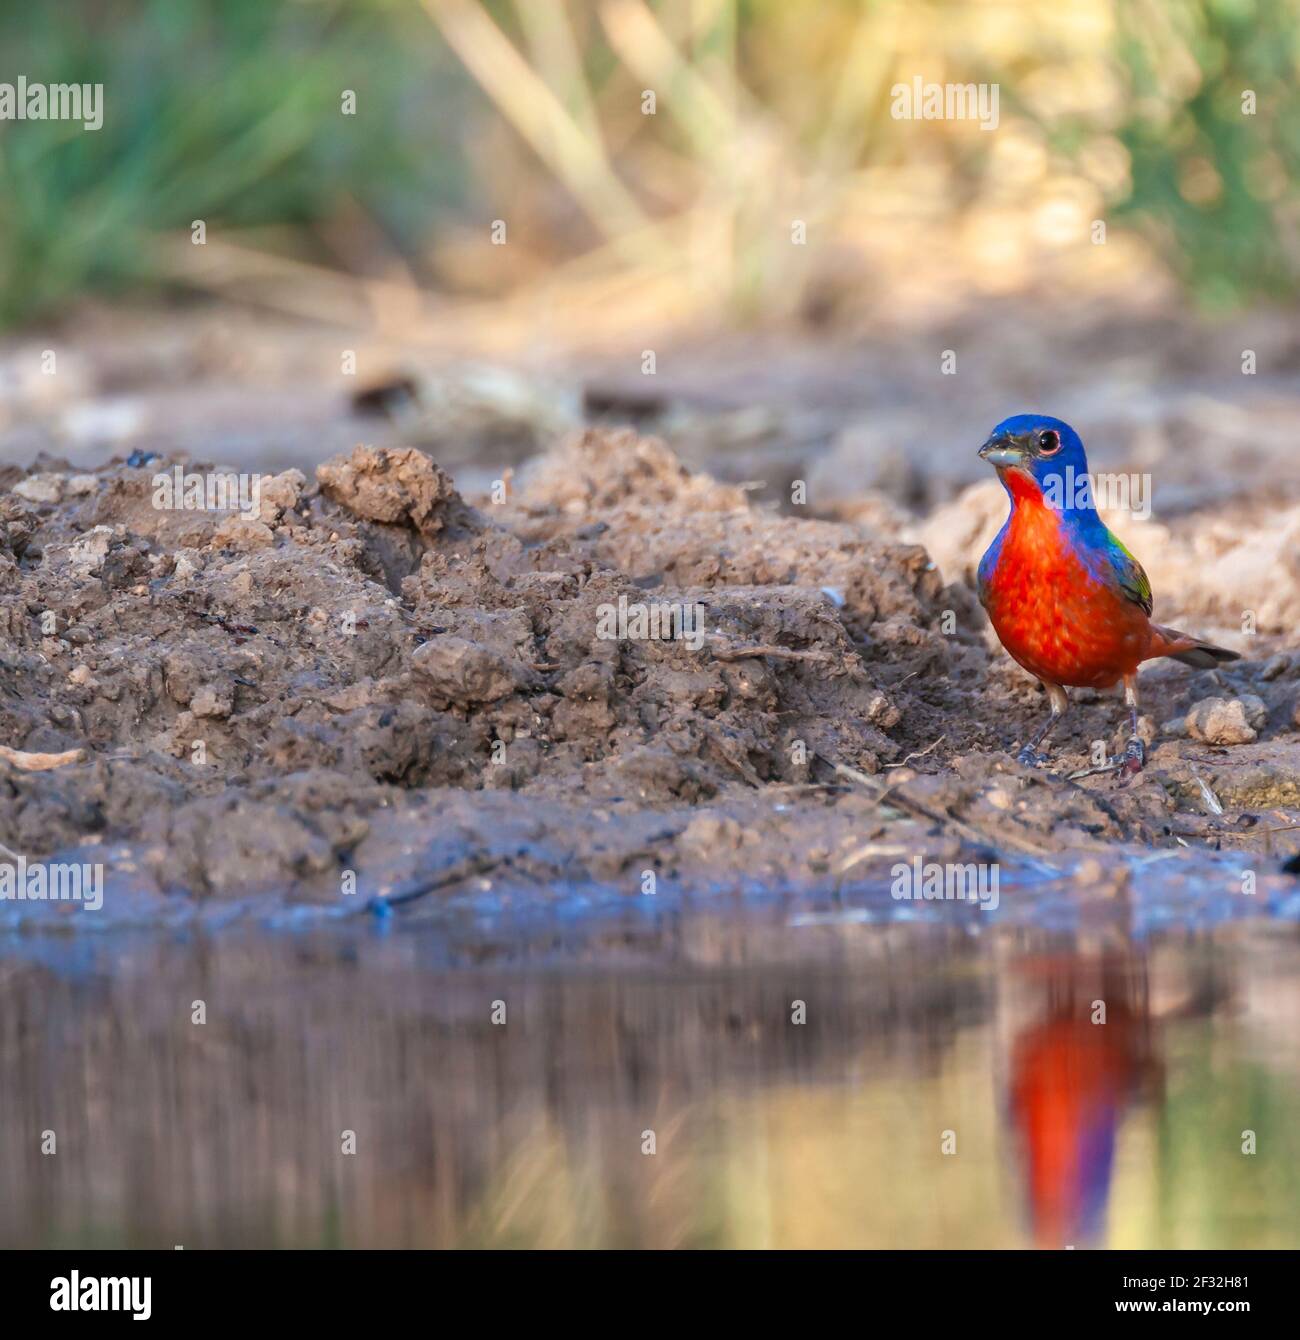 Painted Bunting, Passerina ciris, amazingly colorful bird, looking for water and relief from summer heat, on a ranch in South Texas. Stock Photo